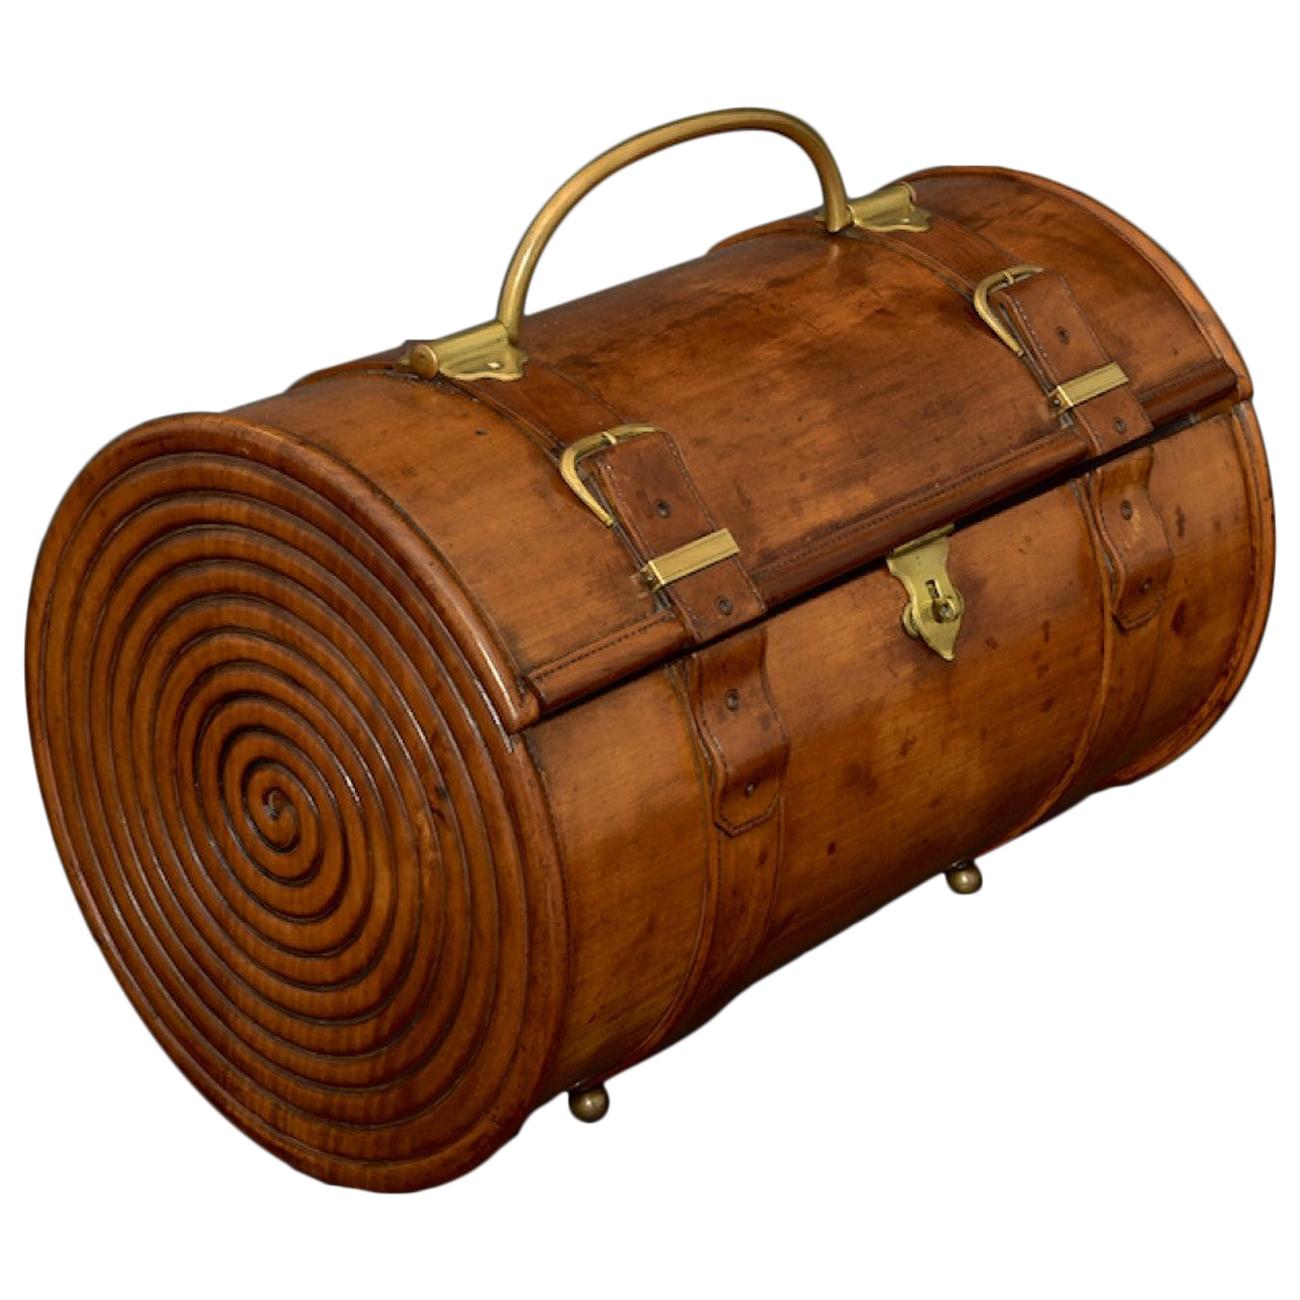 Carved Cylindrical Fruitwood Box, circa 1900